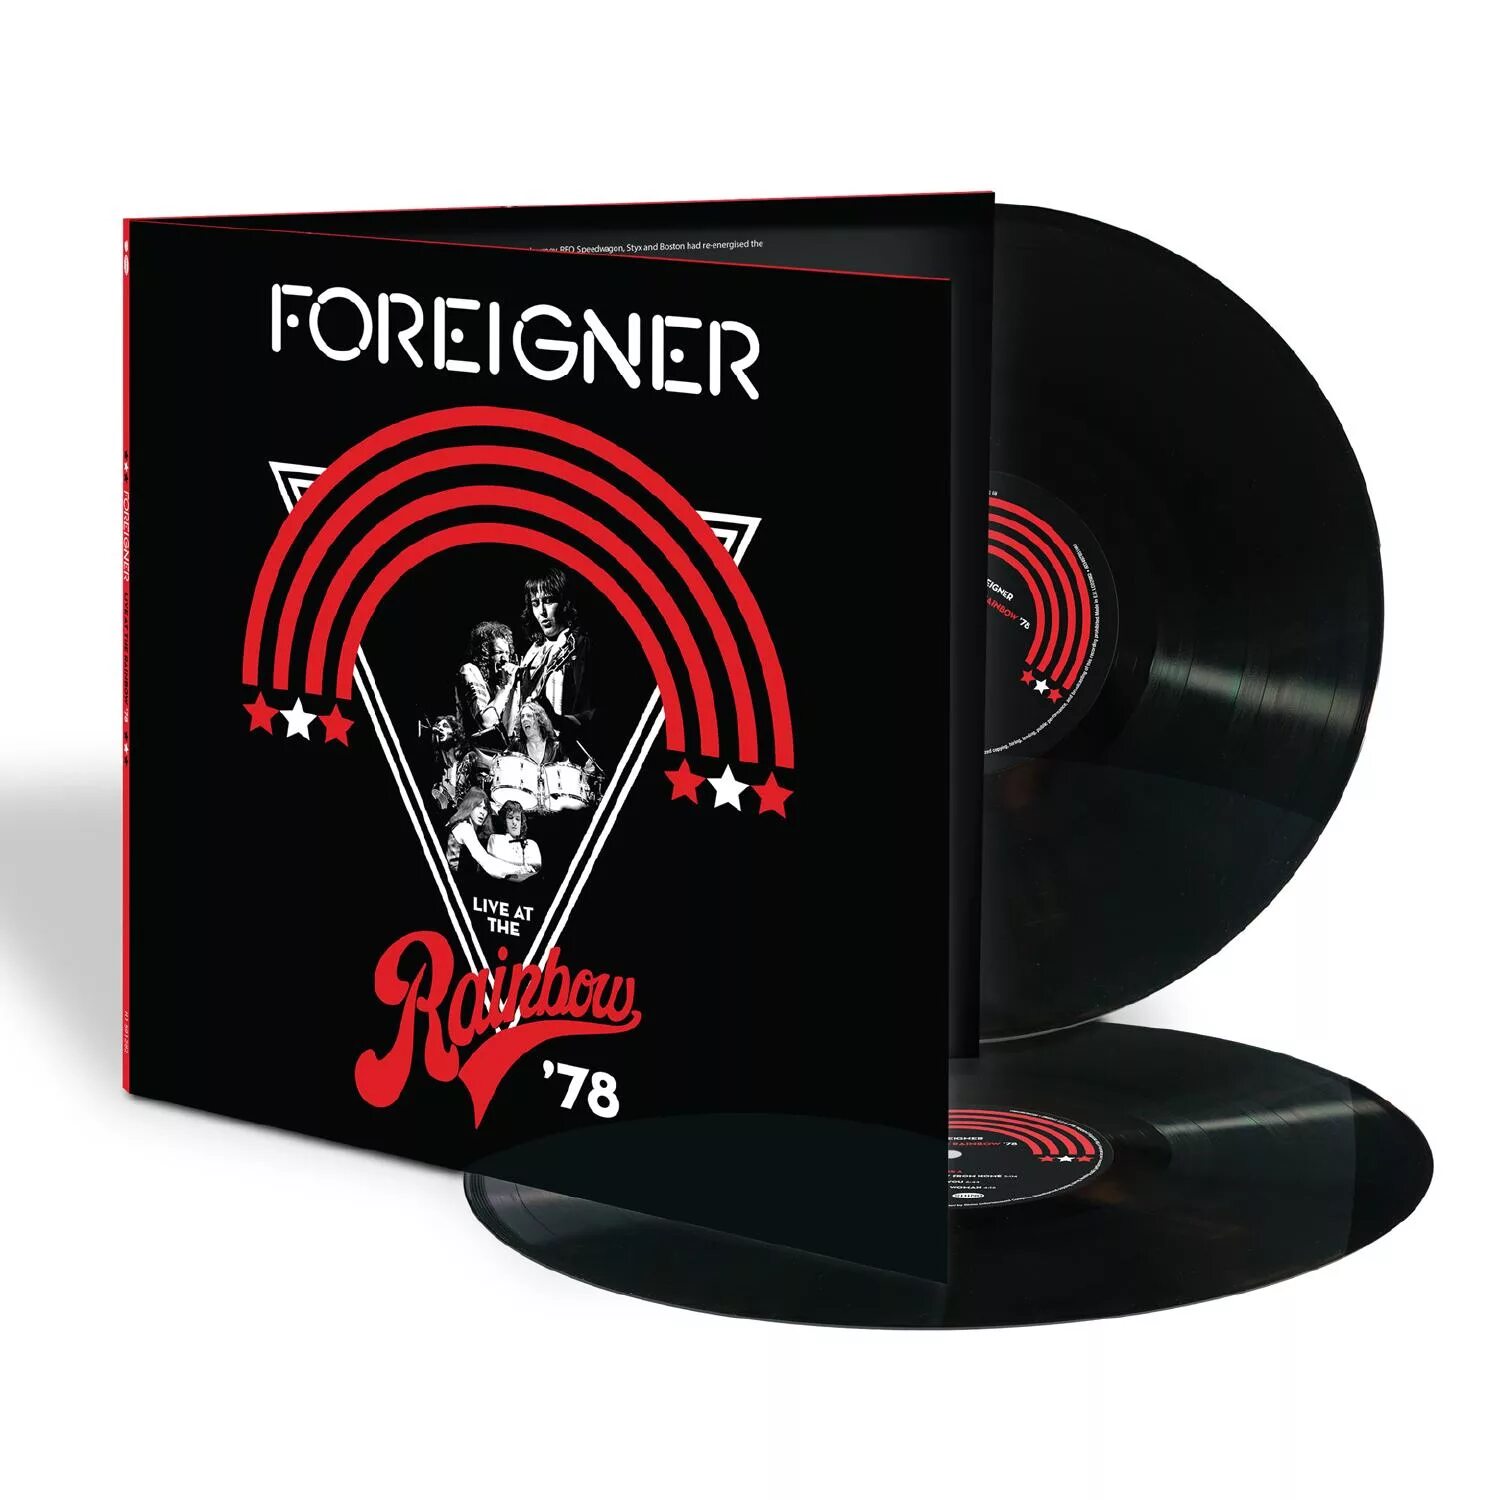 Cd 78. Рок диски. Foreigner "Live in Chicago". Foreigner Live at the Rainbow обложки. Live at the Rainbow ‘78.